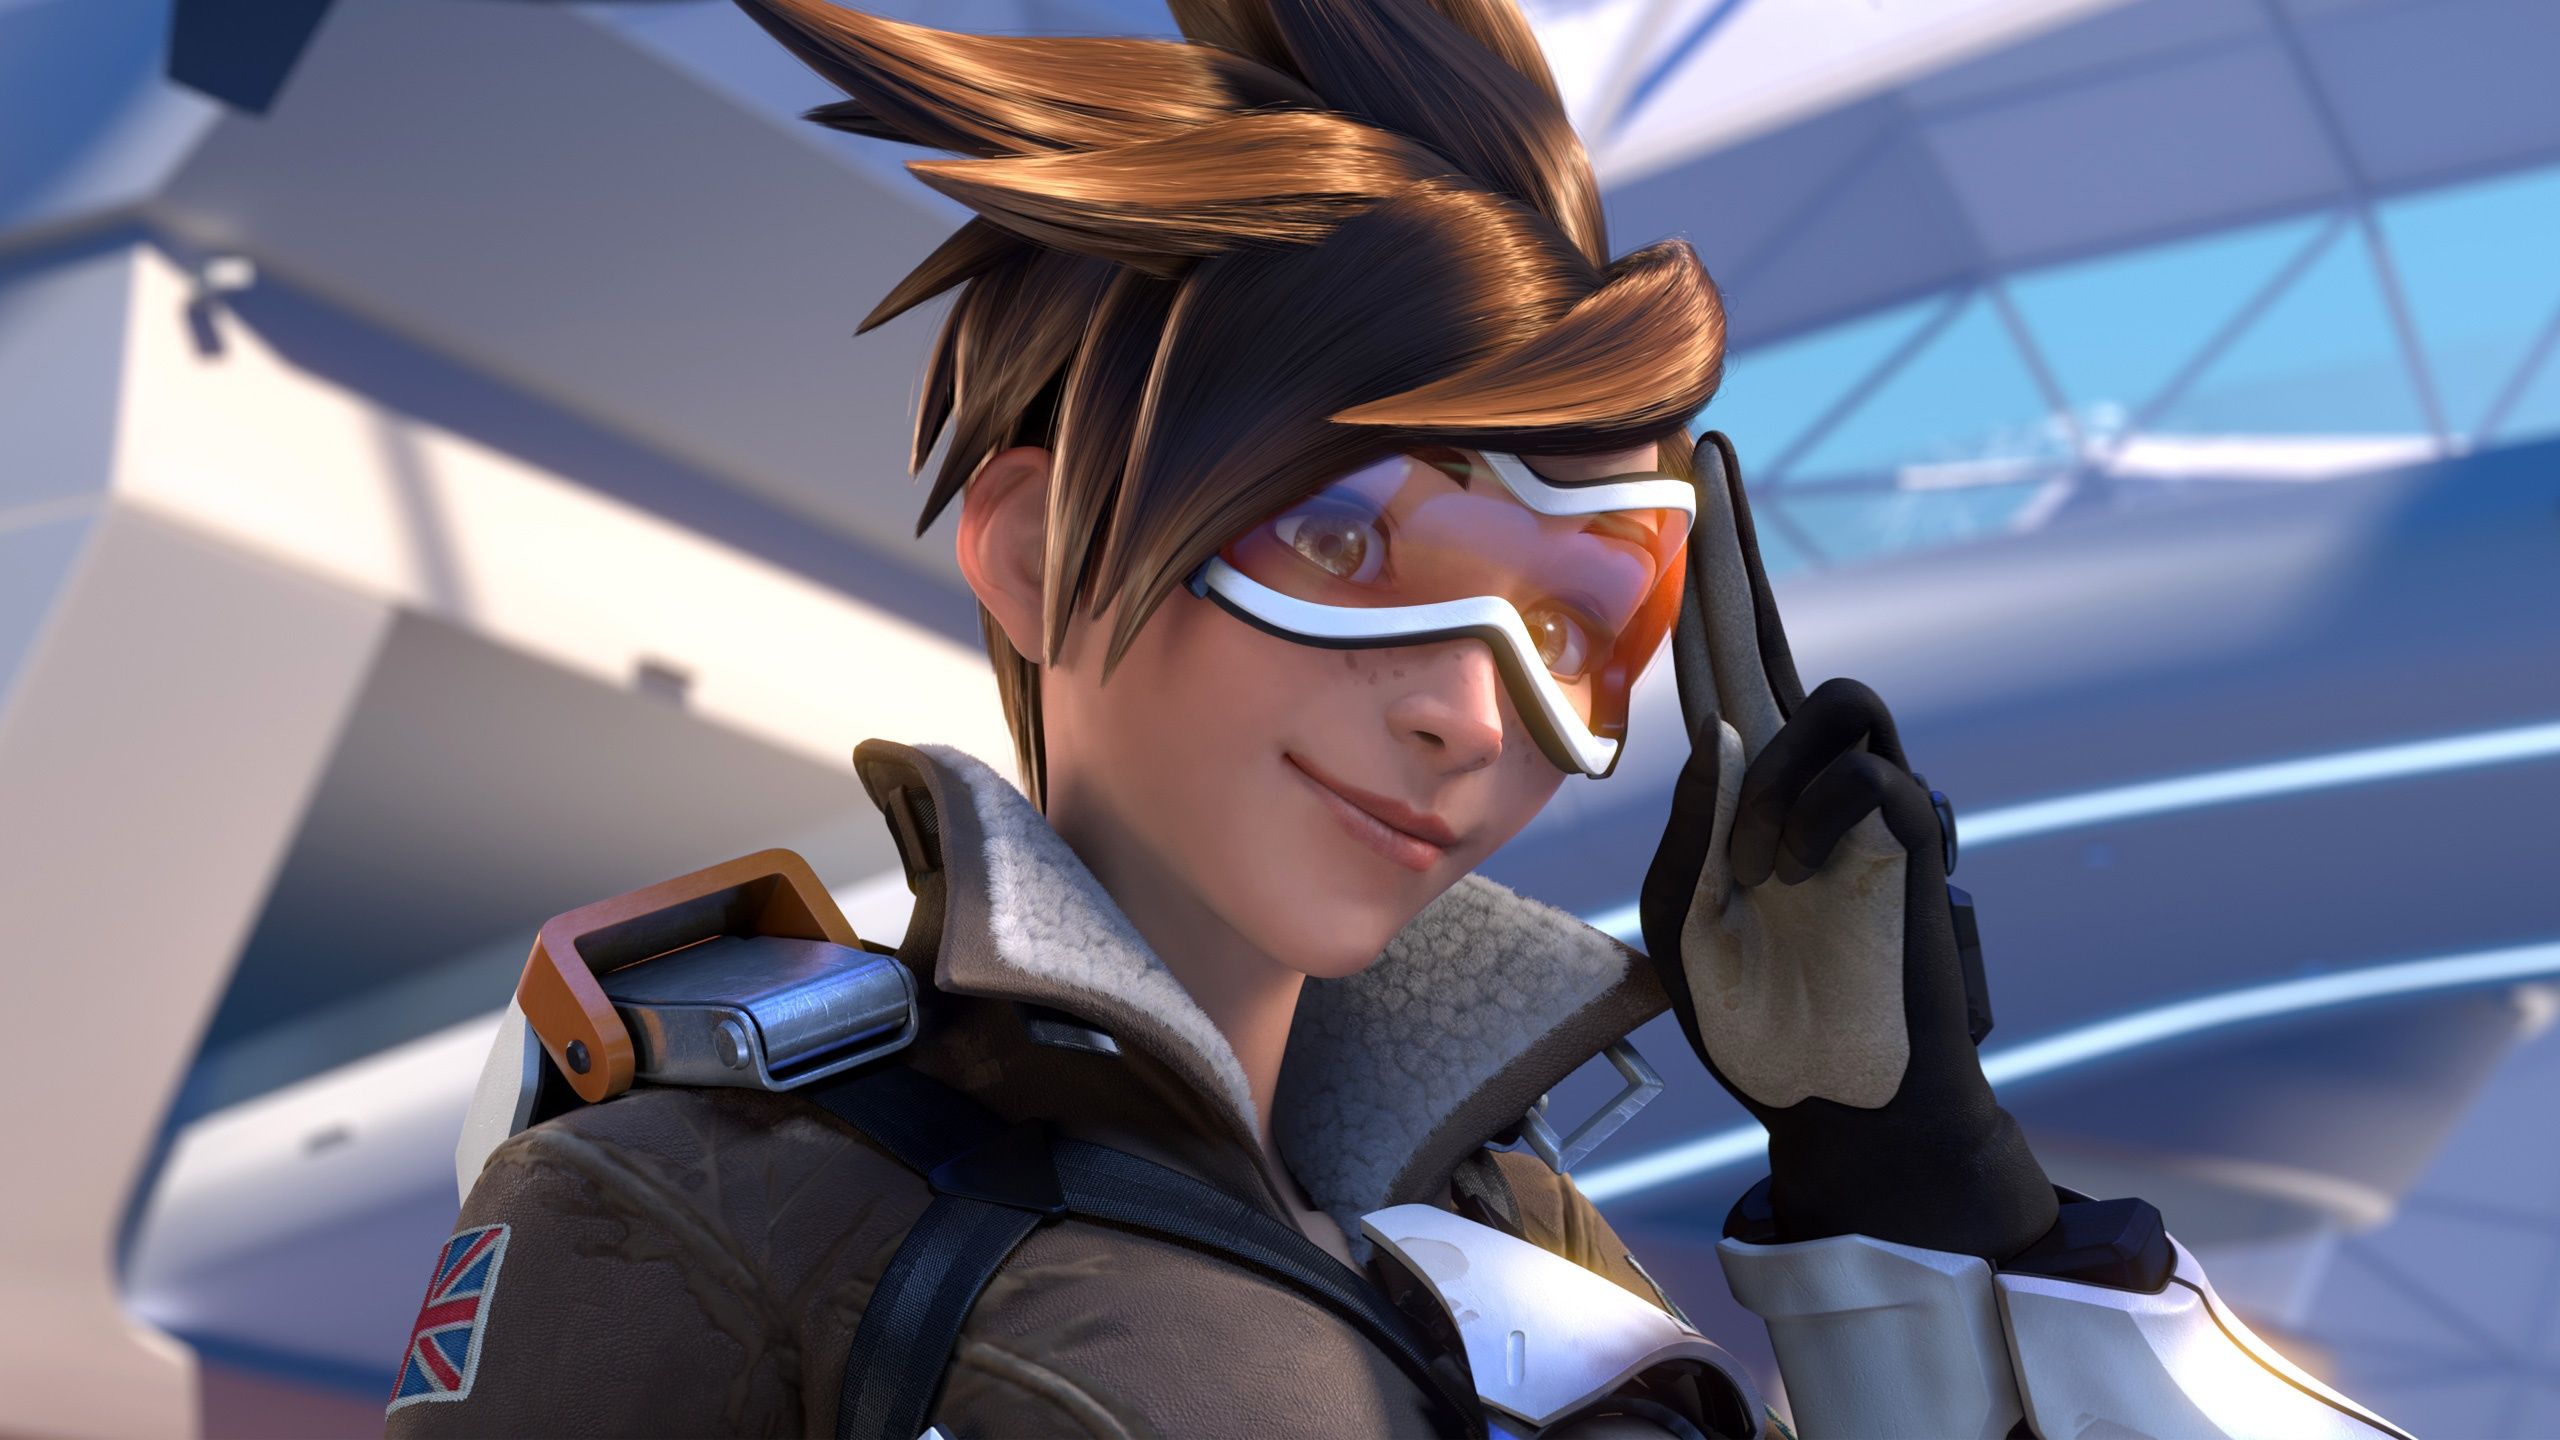 Cheers Love : Tracer s 10 Best Overwatch Skins Ranked. 